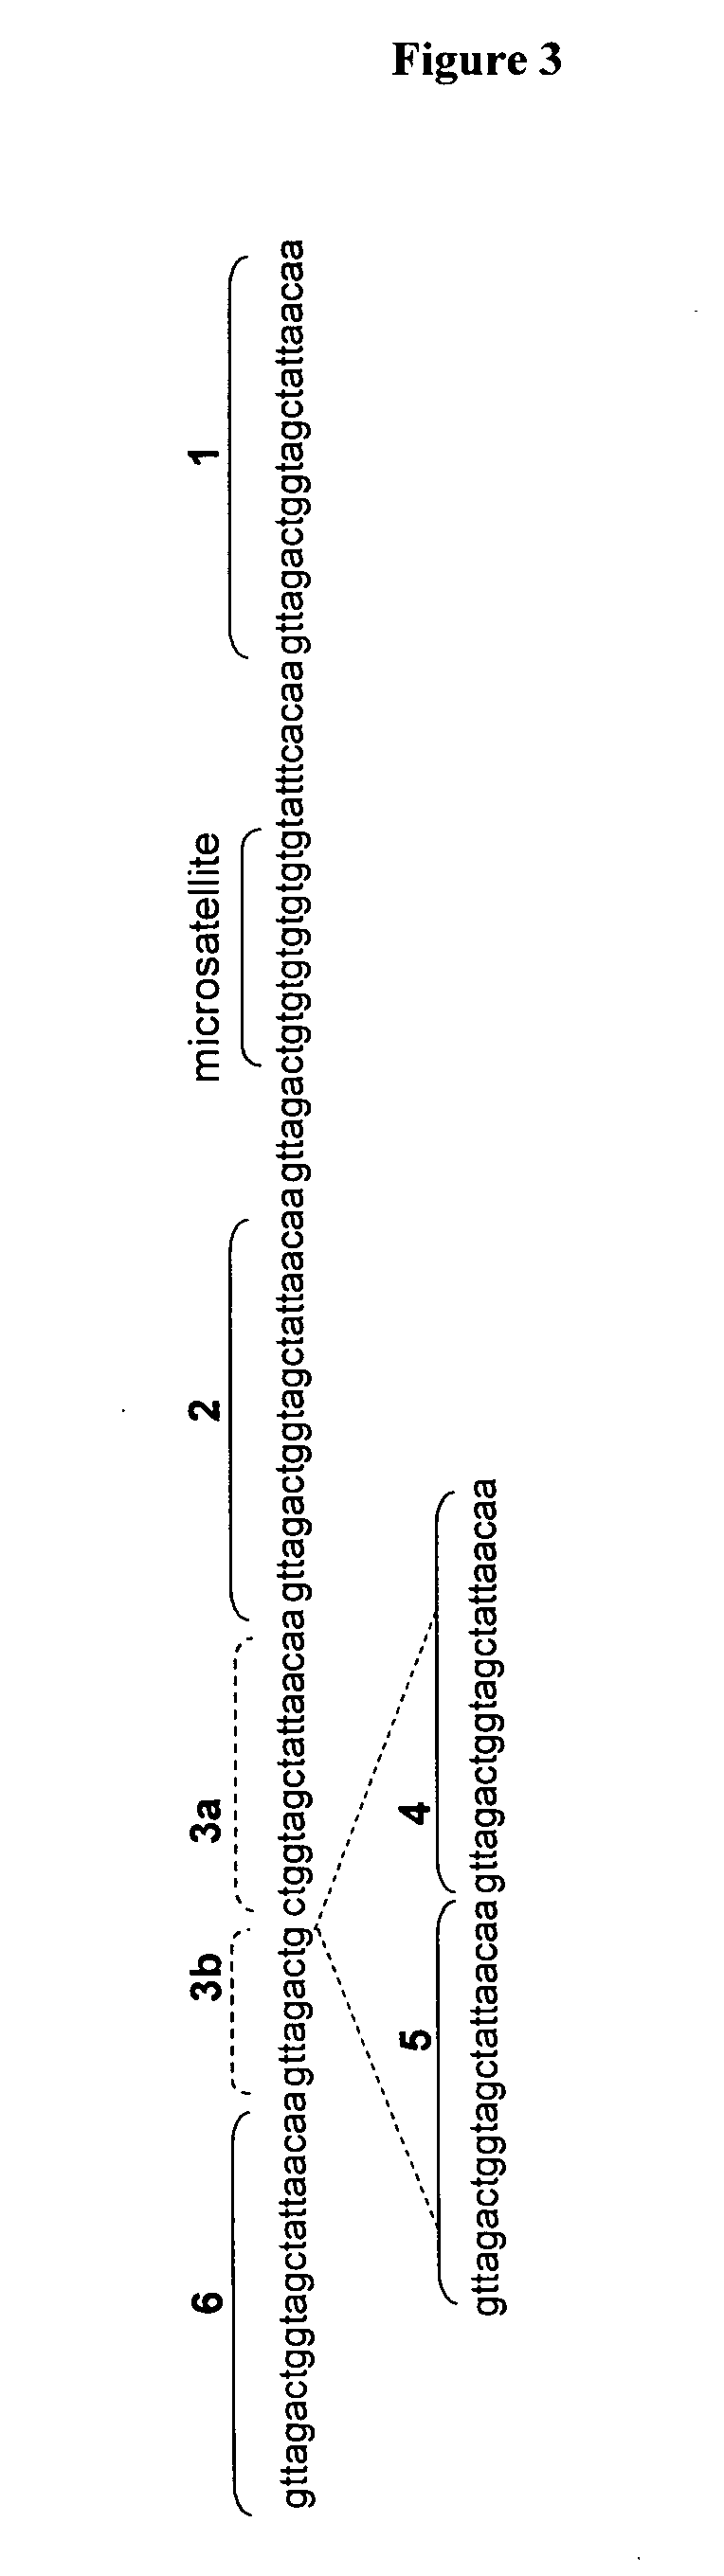 Chimeric Compositions and Methods for Regulating Plant Gene Expresssion